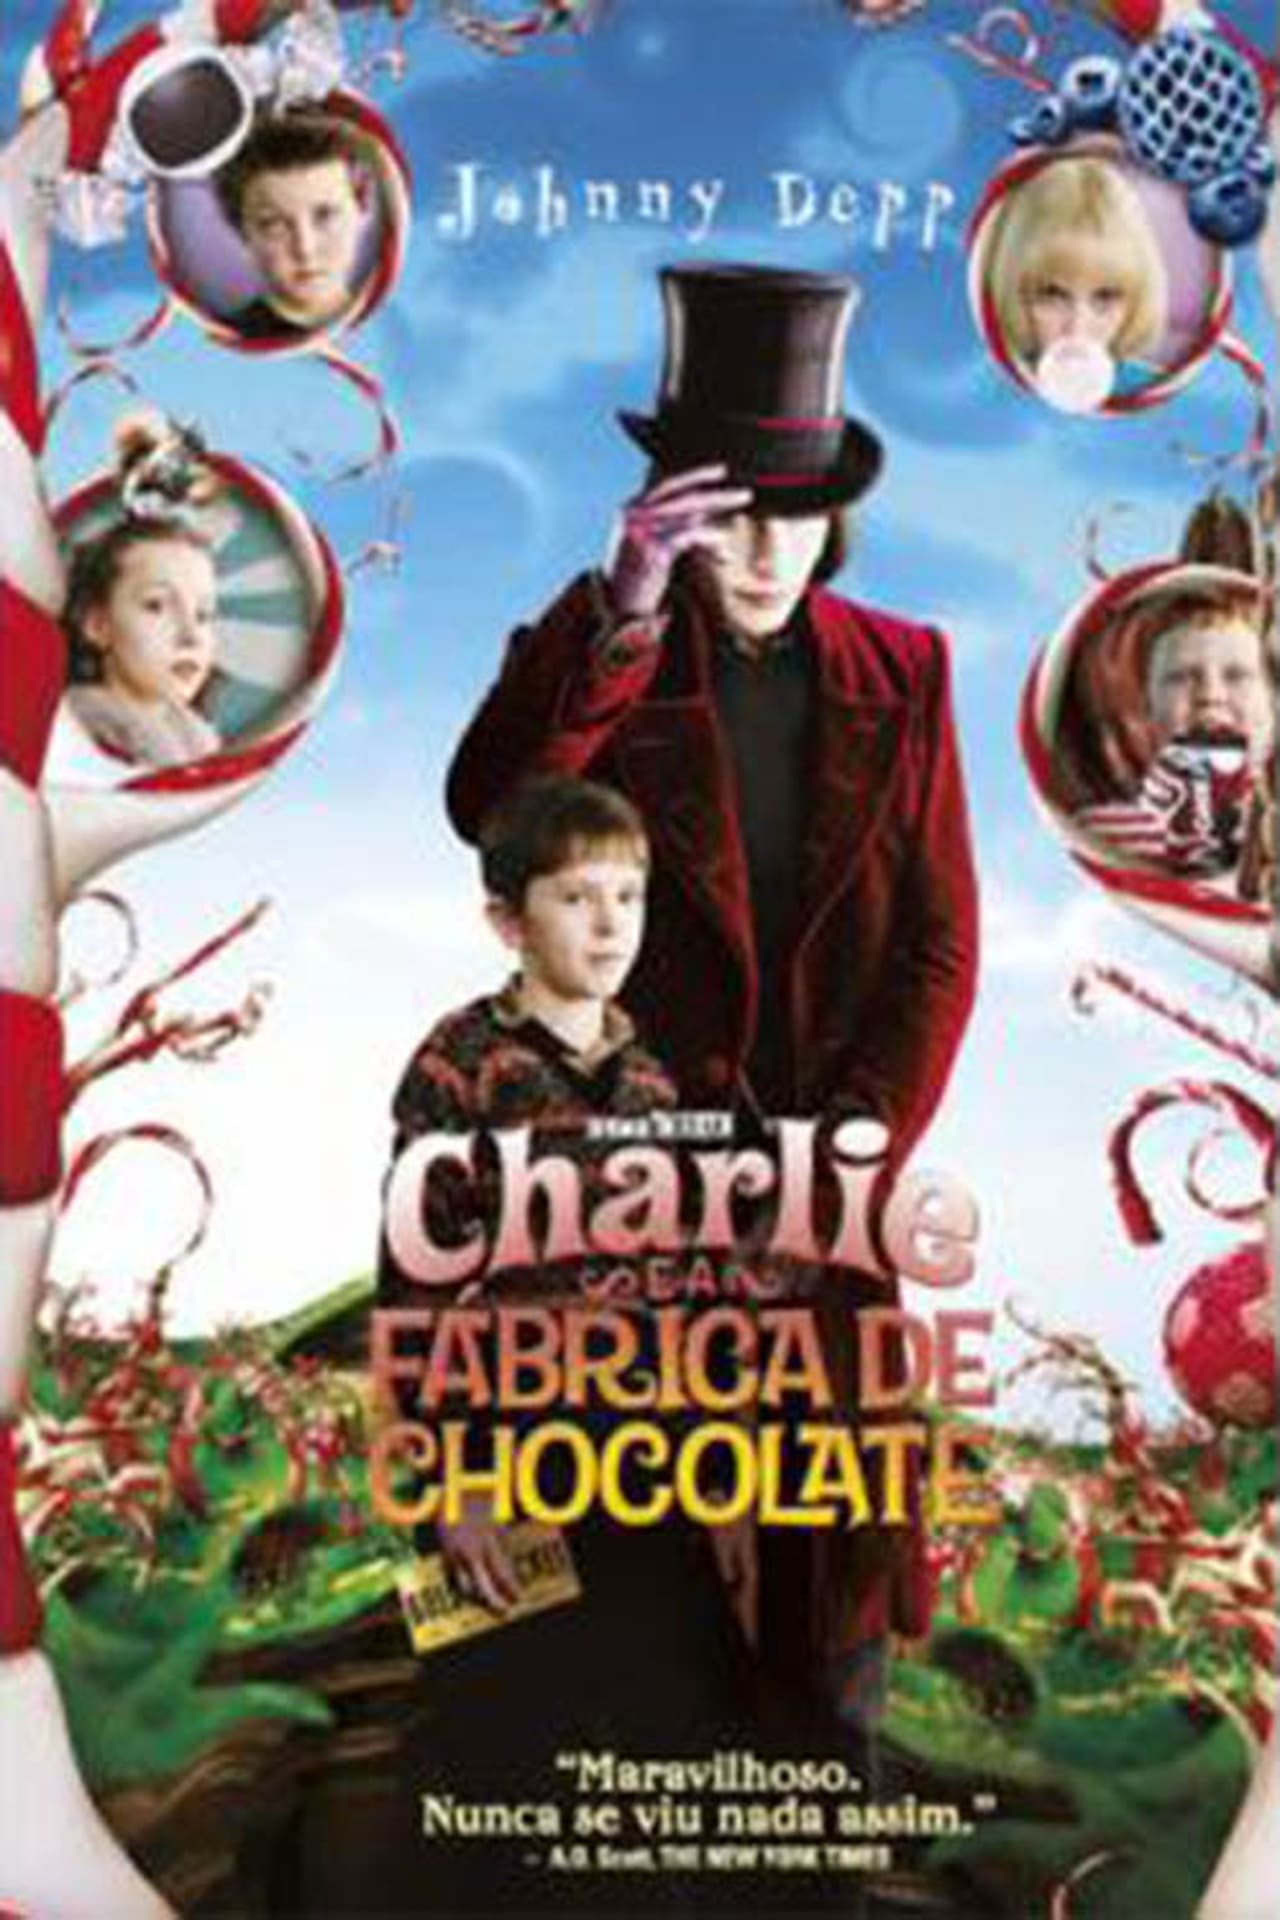 Full Free Watch Charlie and the Chocolate Factory (2005) Online Full